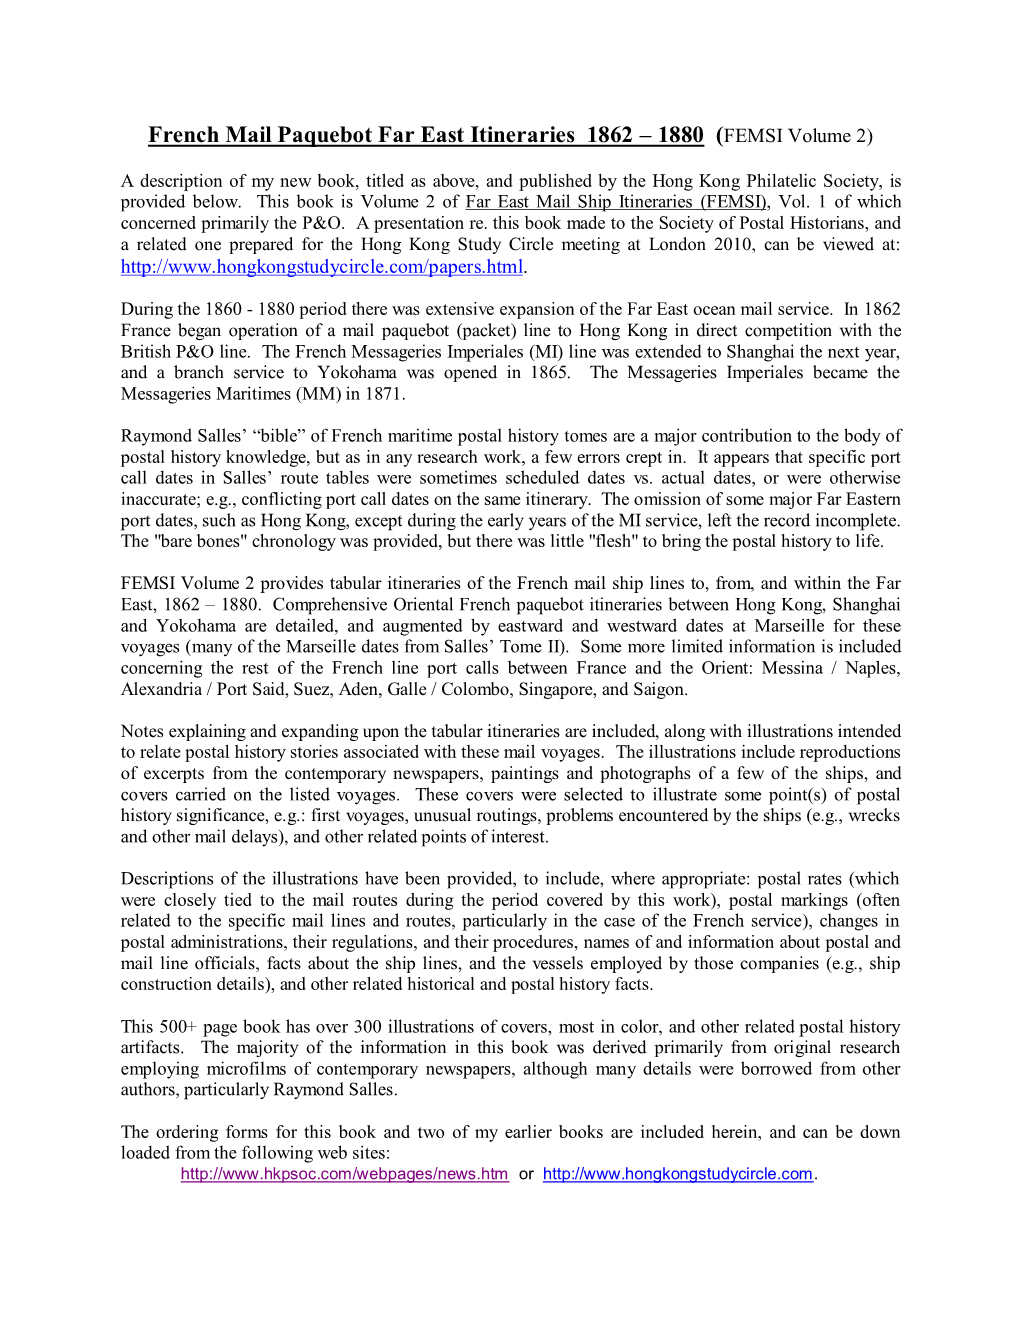 Description of My New Book, Titled As Above, and Published by the Hong Kong Philatelic Society, Is Provided Below